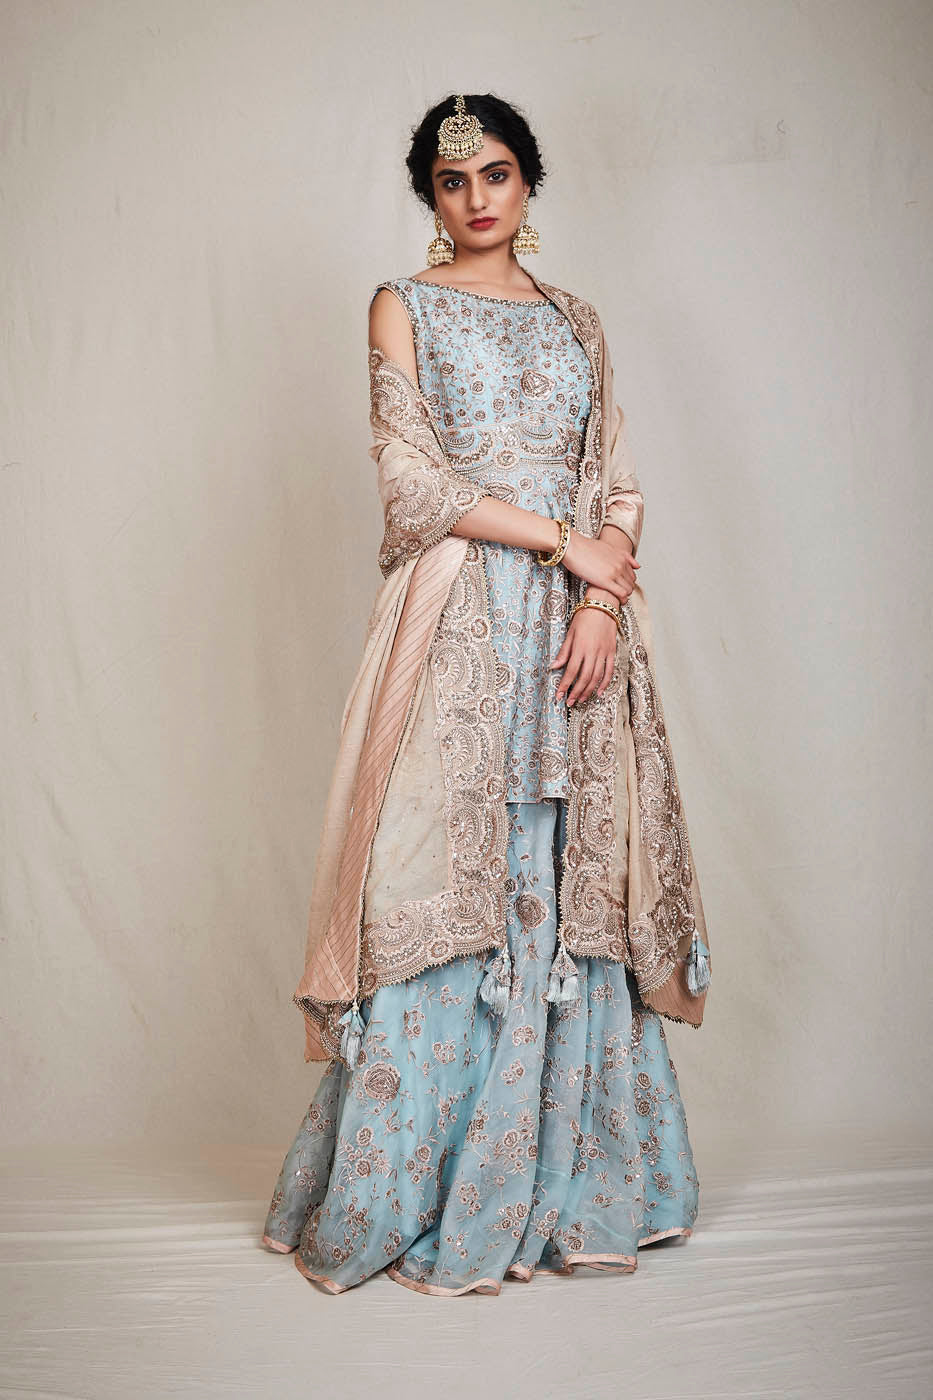 Which online shop should I opt for to purchase sharara suits? - Quora